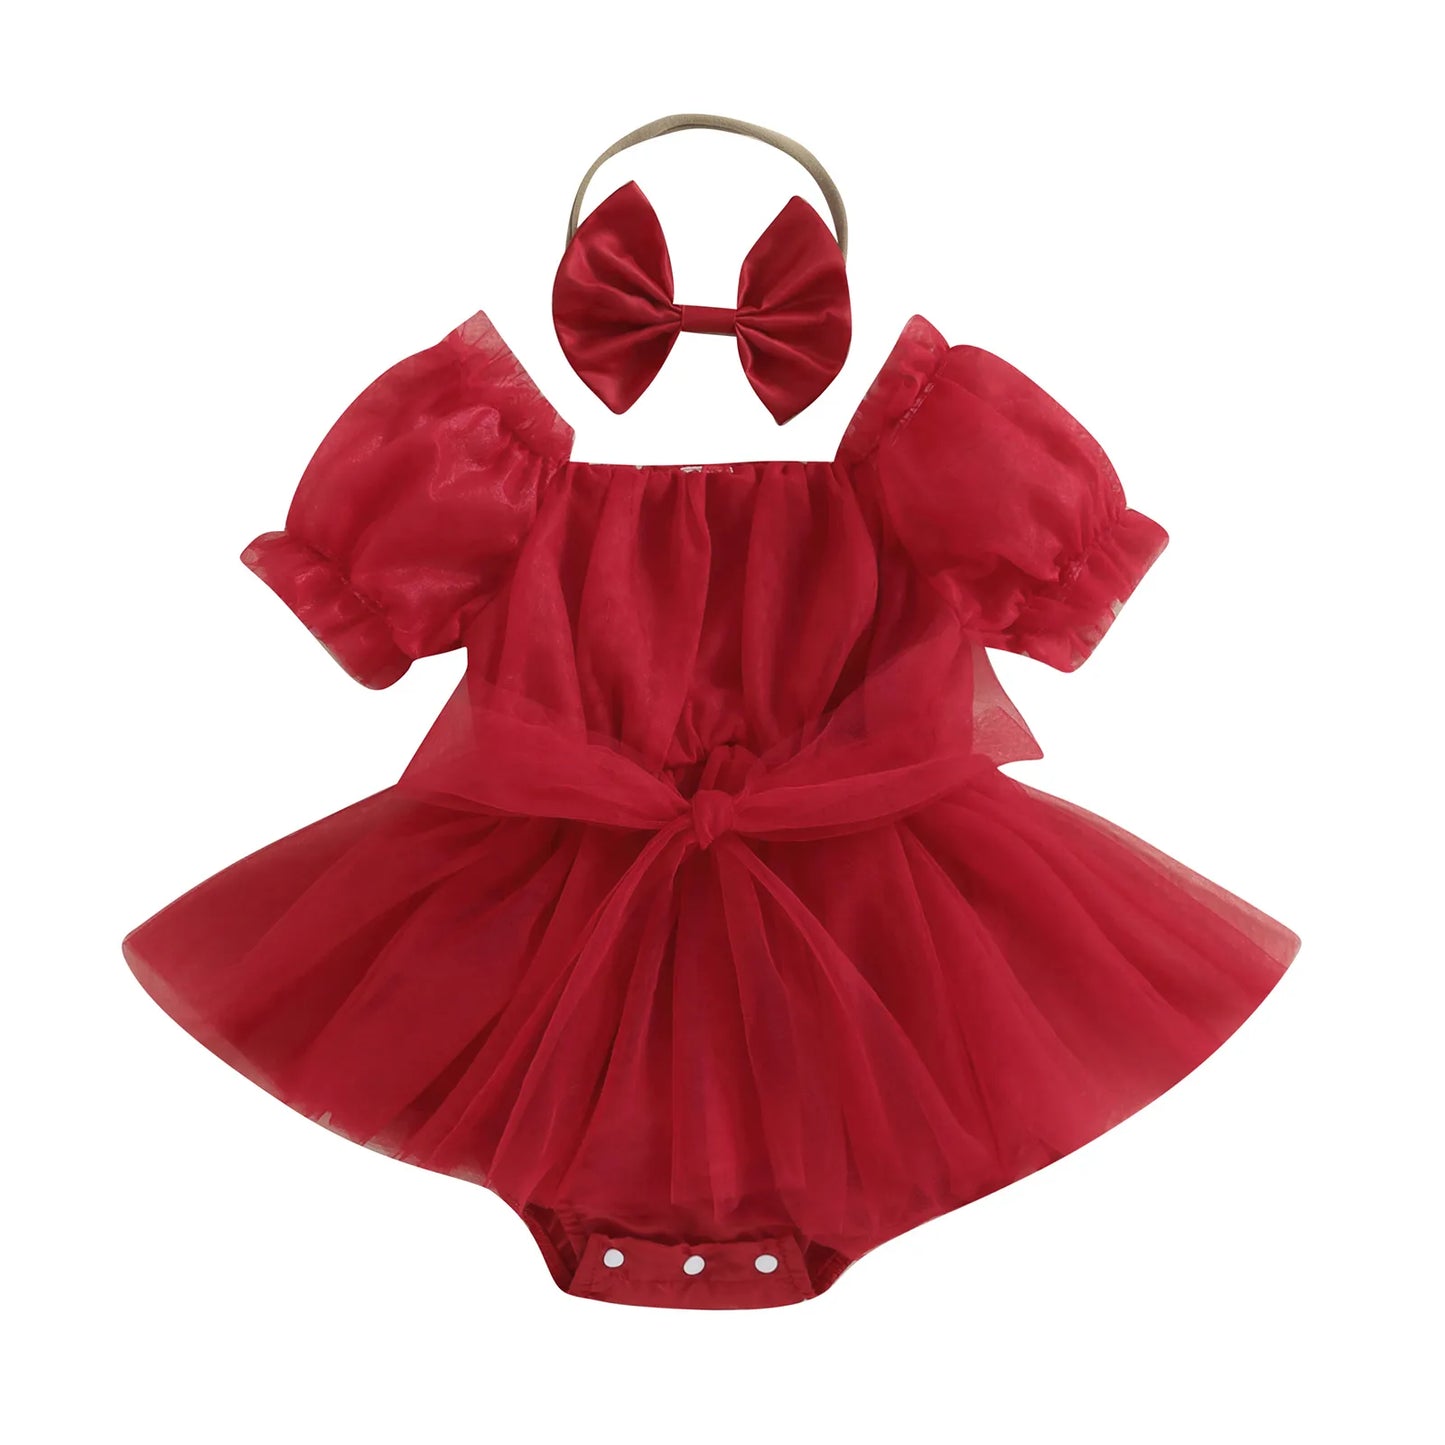 baby 0-24M Christmas Newborn Infant Baby Girl Red Romper, Tulle Bow Ruffle Jumpsuit Party Xmas Costumes With Headband Outfits